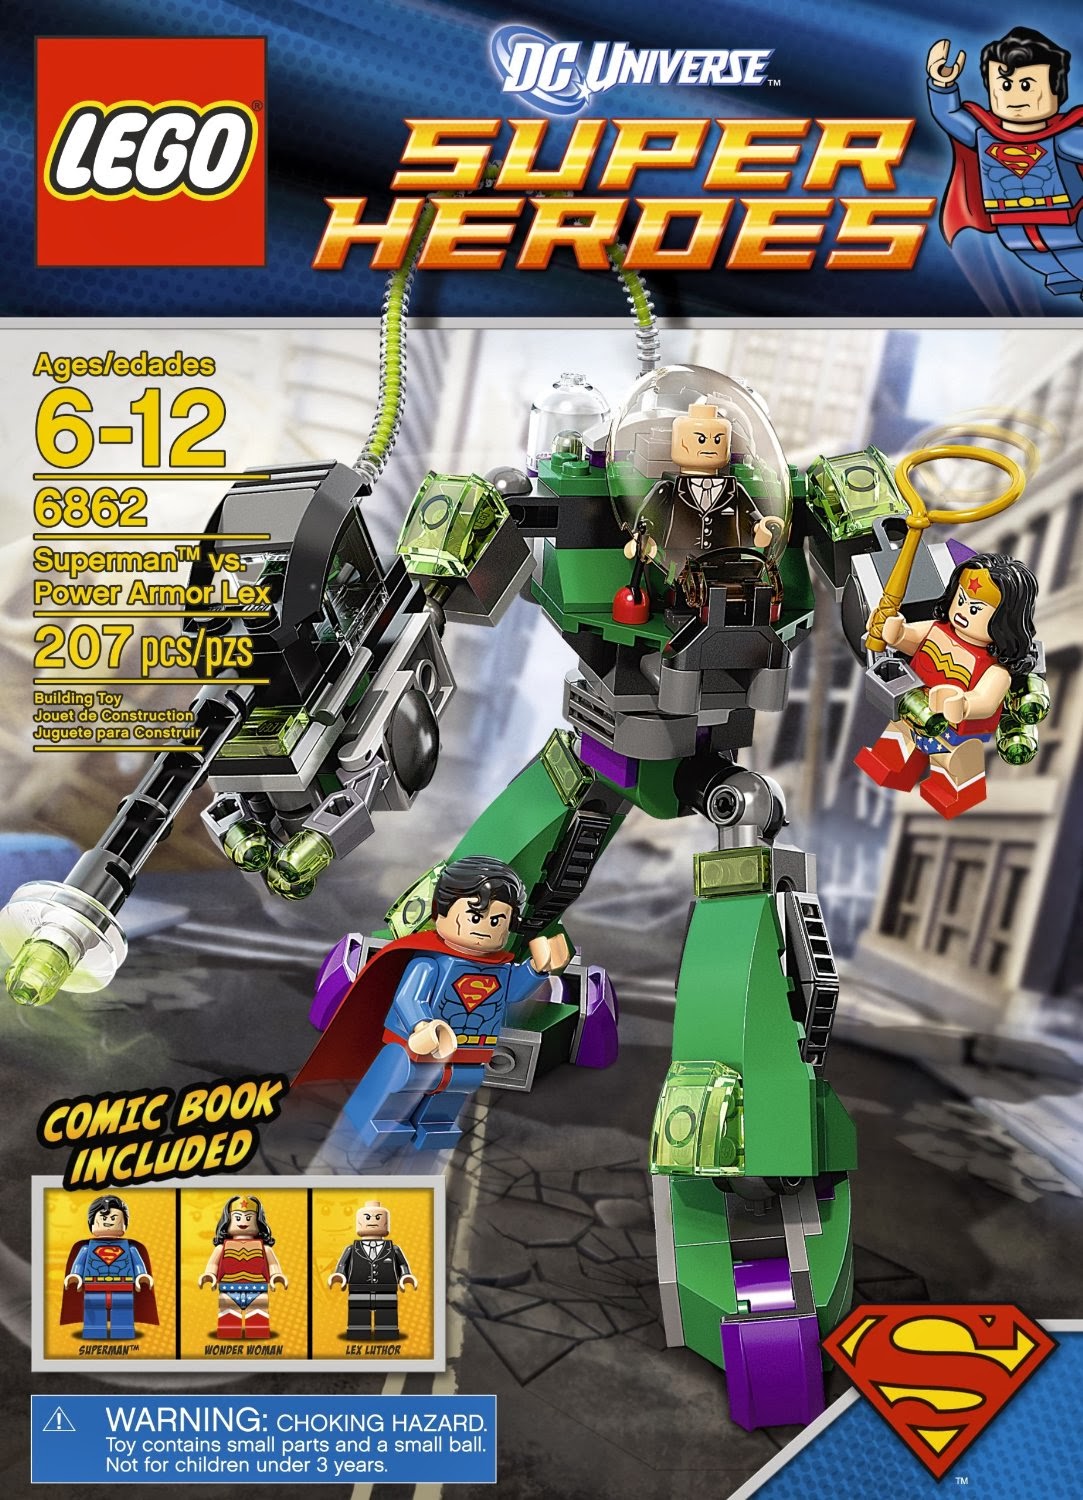 Extreme Couponing Mommy: ***HOT*** LEGO Super Heroes Amazon Deals1083 x 1500